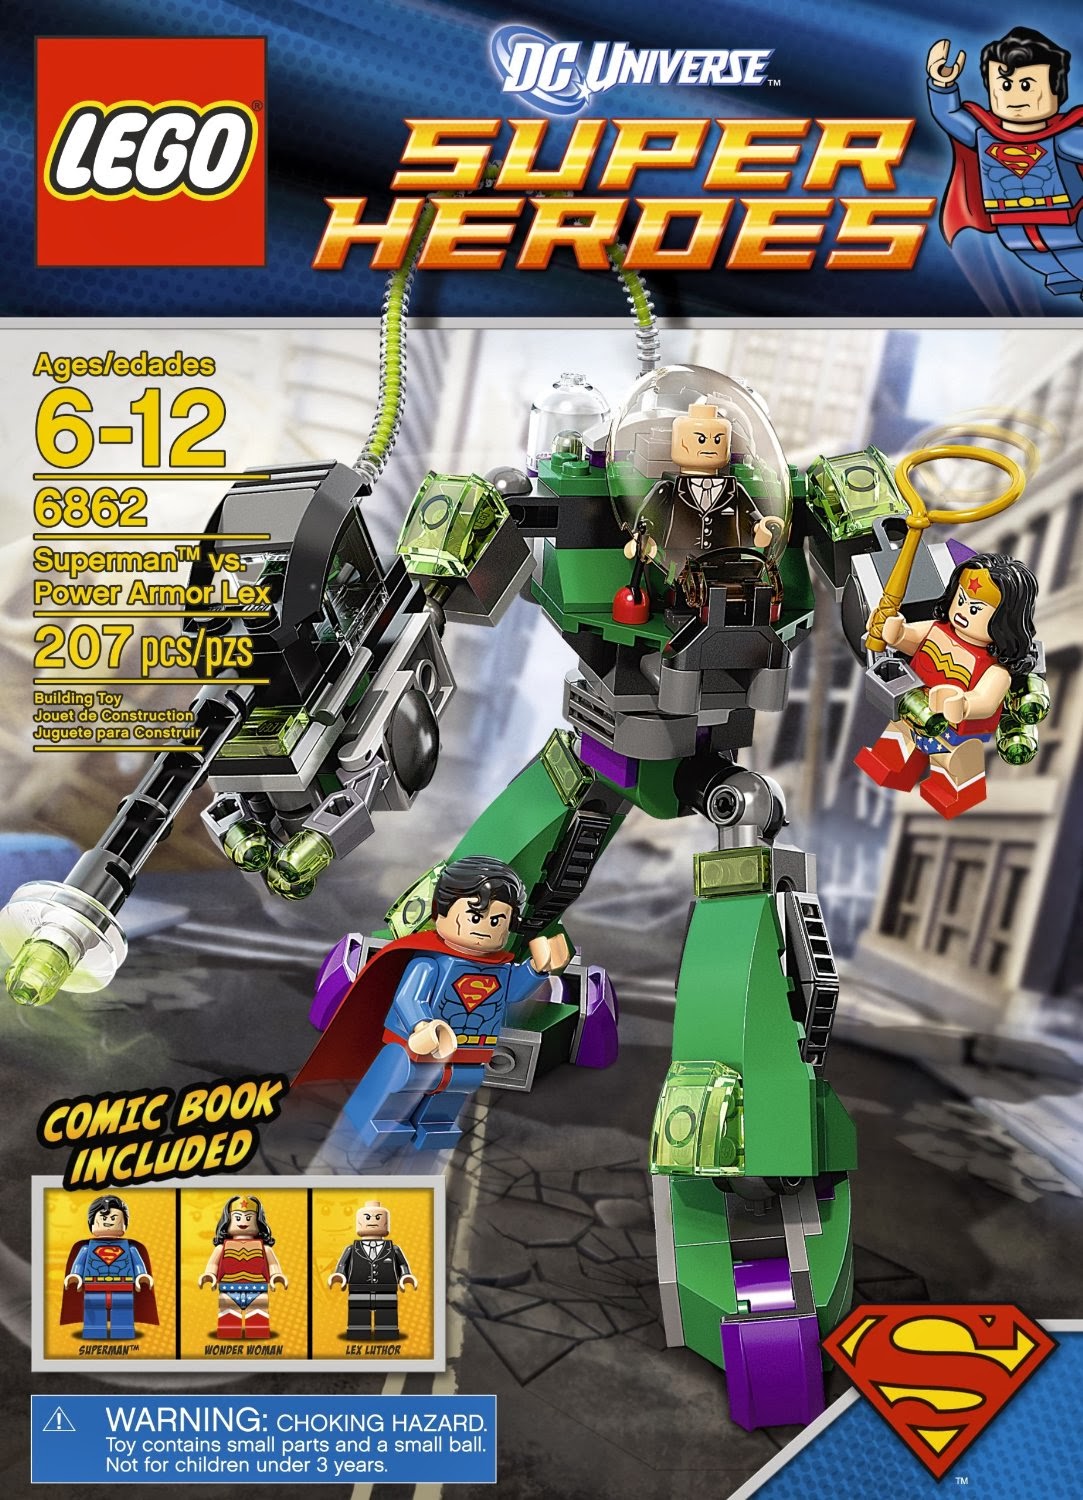 Extreme Couponing Mommy: ***HOT*** LEGO Super Heroes Amazon Deals1083 x 1500